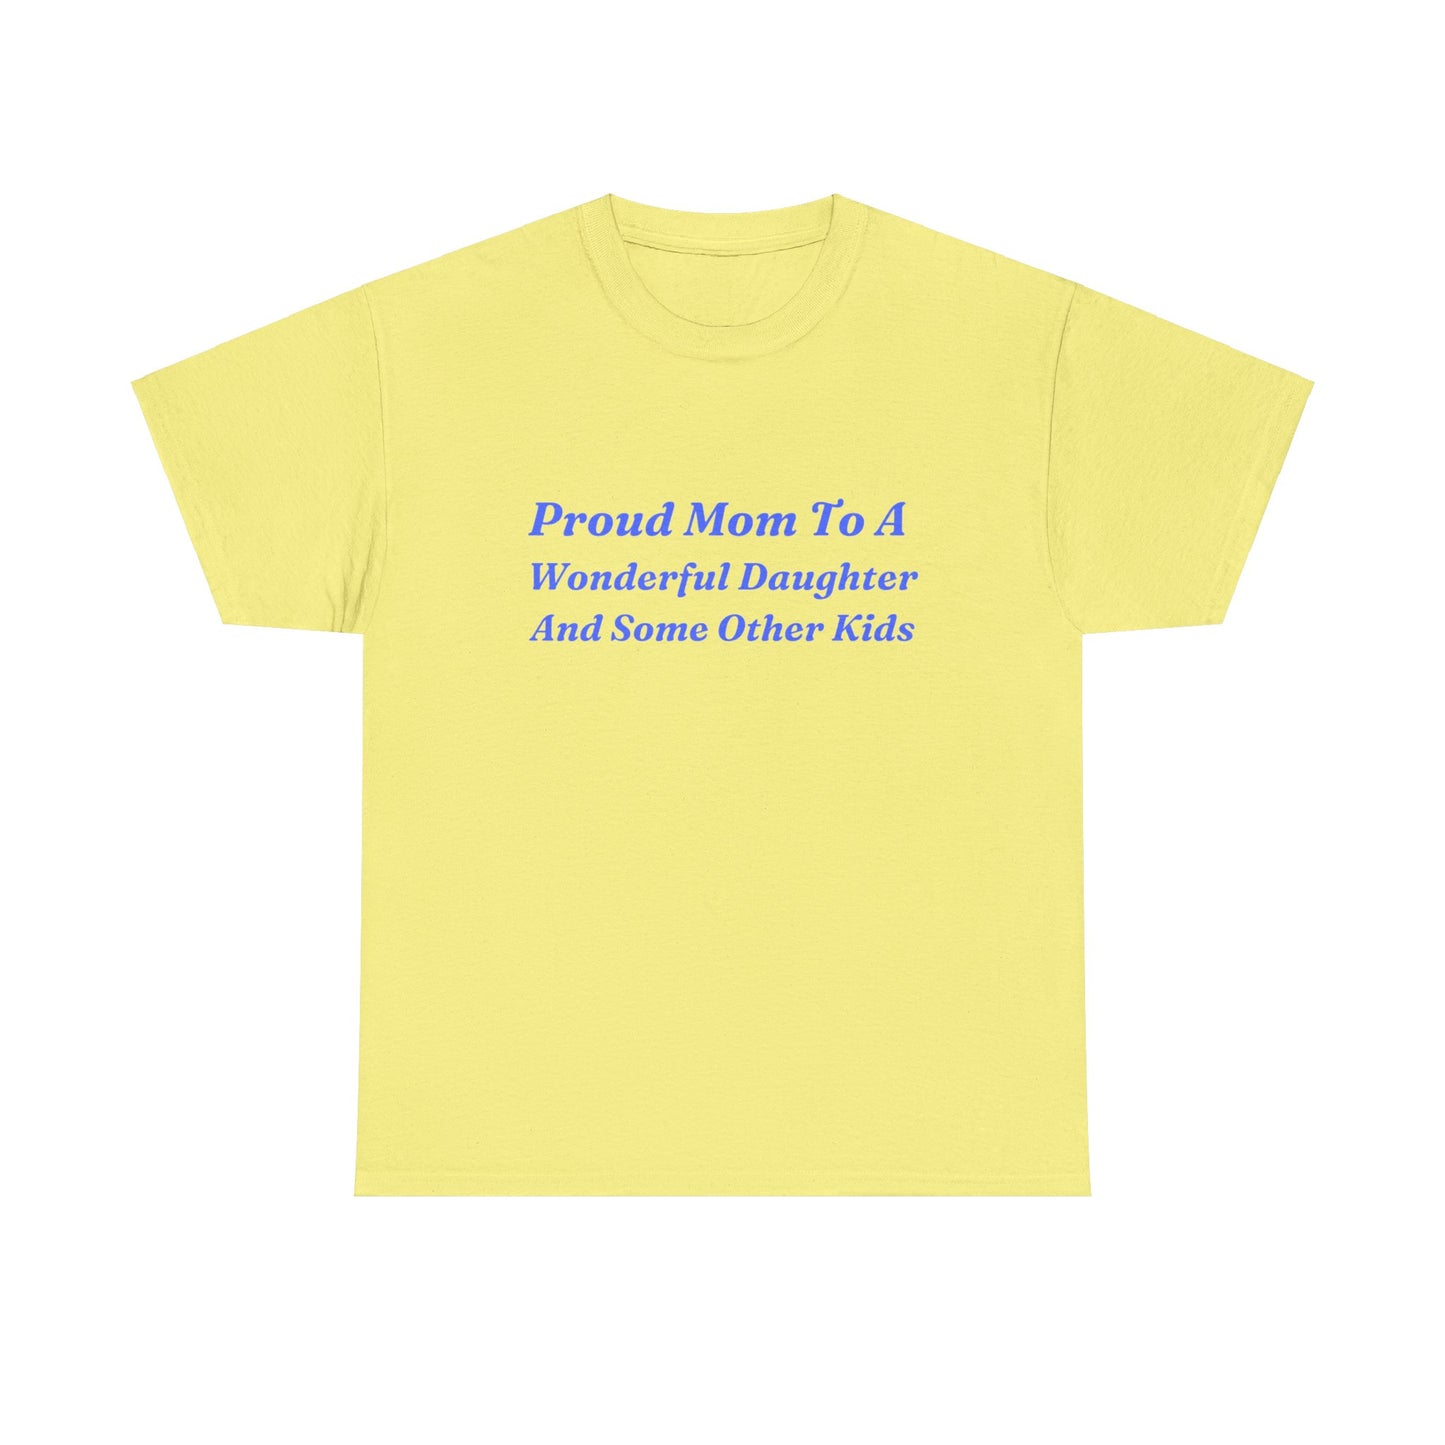 "Proud Mom To A Wonderful Daughter And Some Other Kids" Shirt